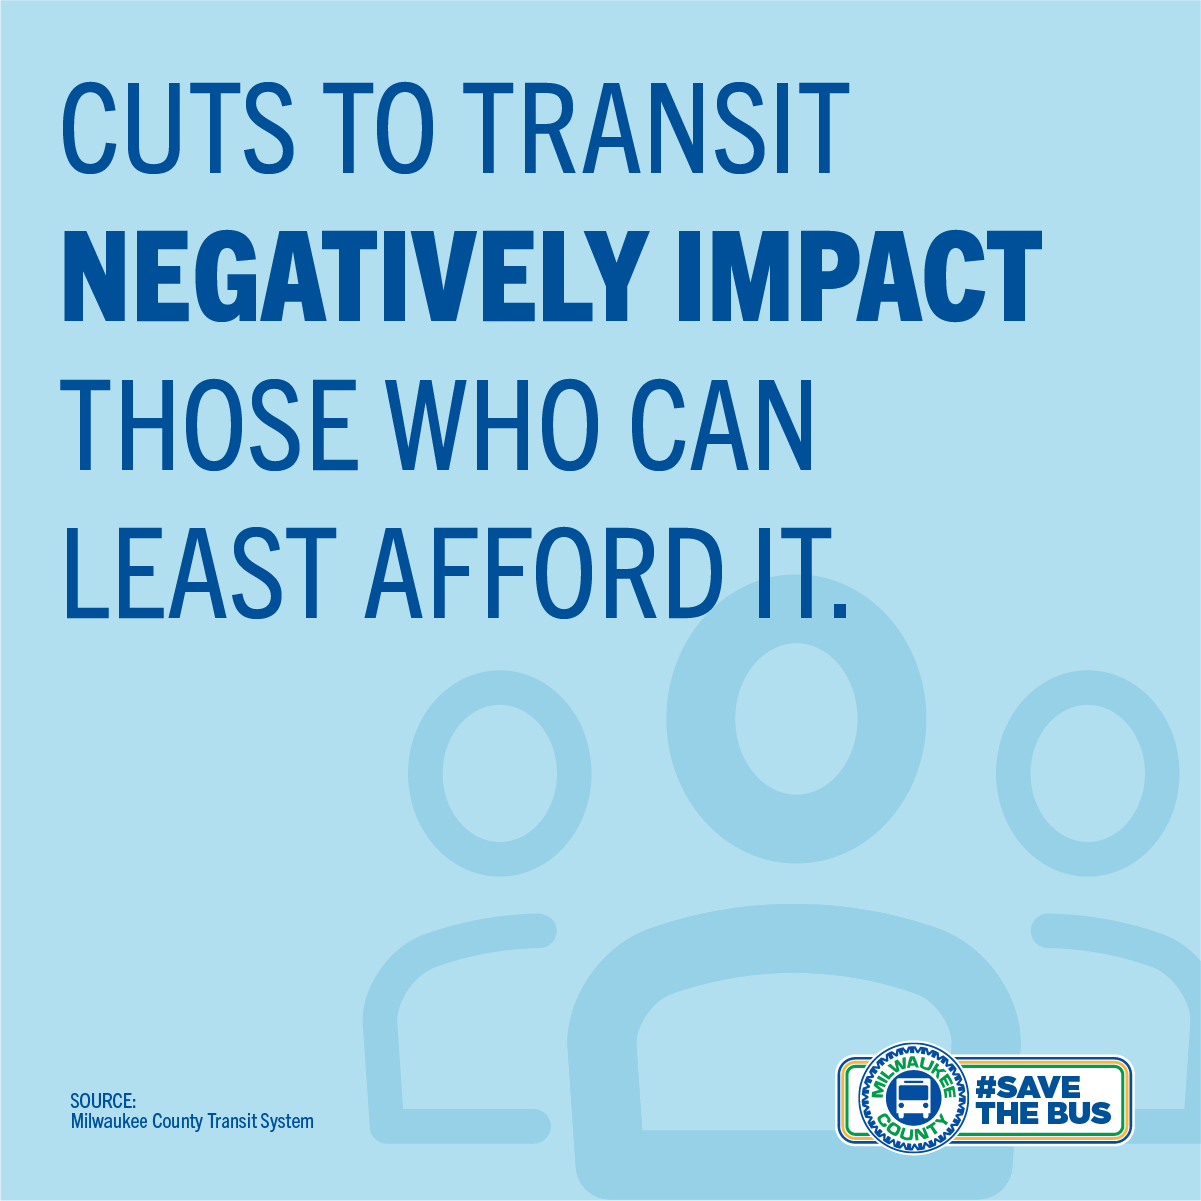 Cuts to transit negatively impact those who can least afford it.